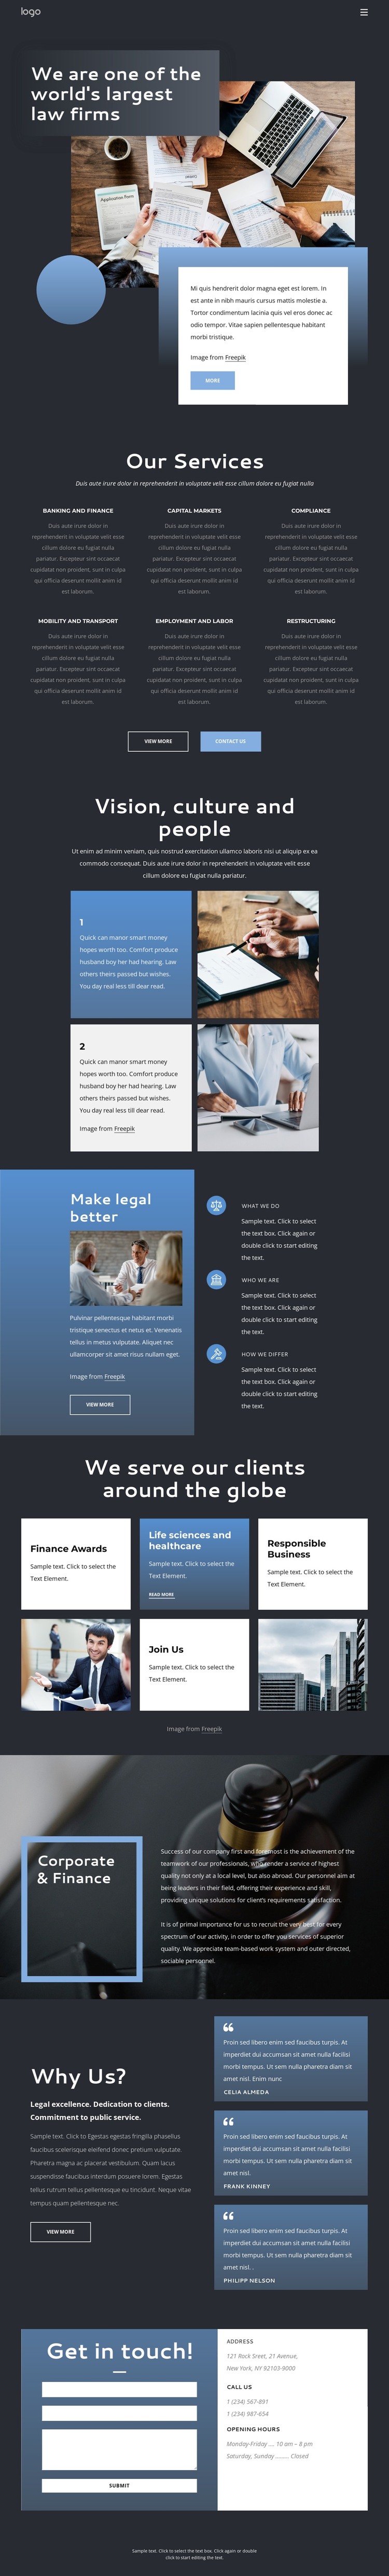 We are an elite law firm WordPress Theme